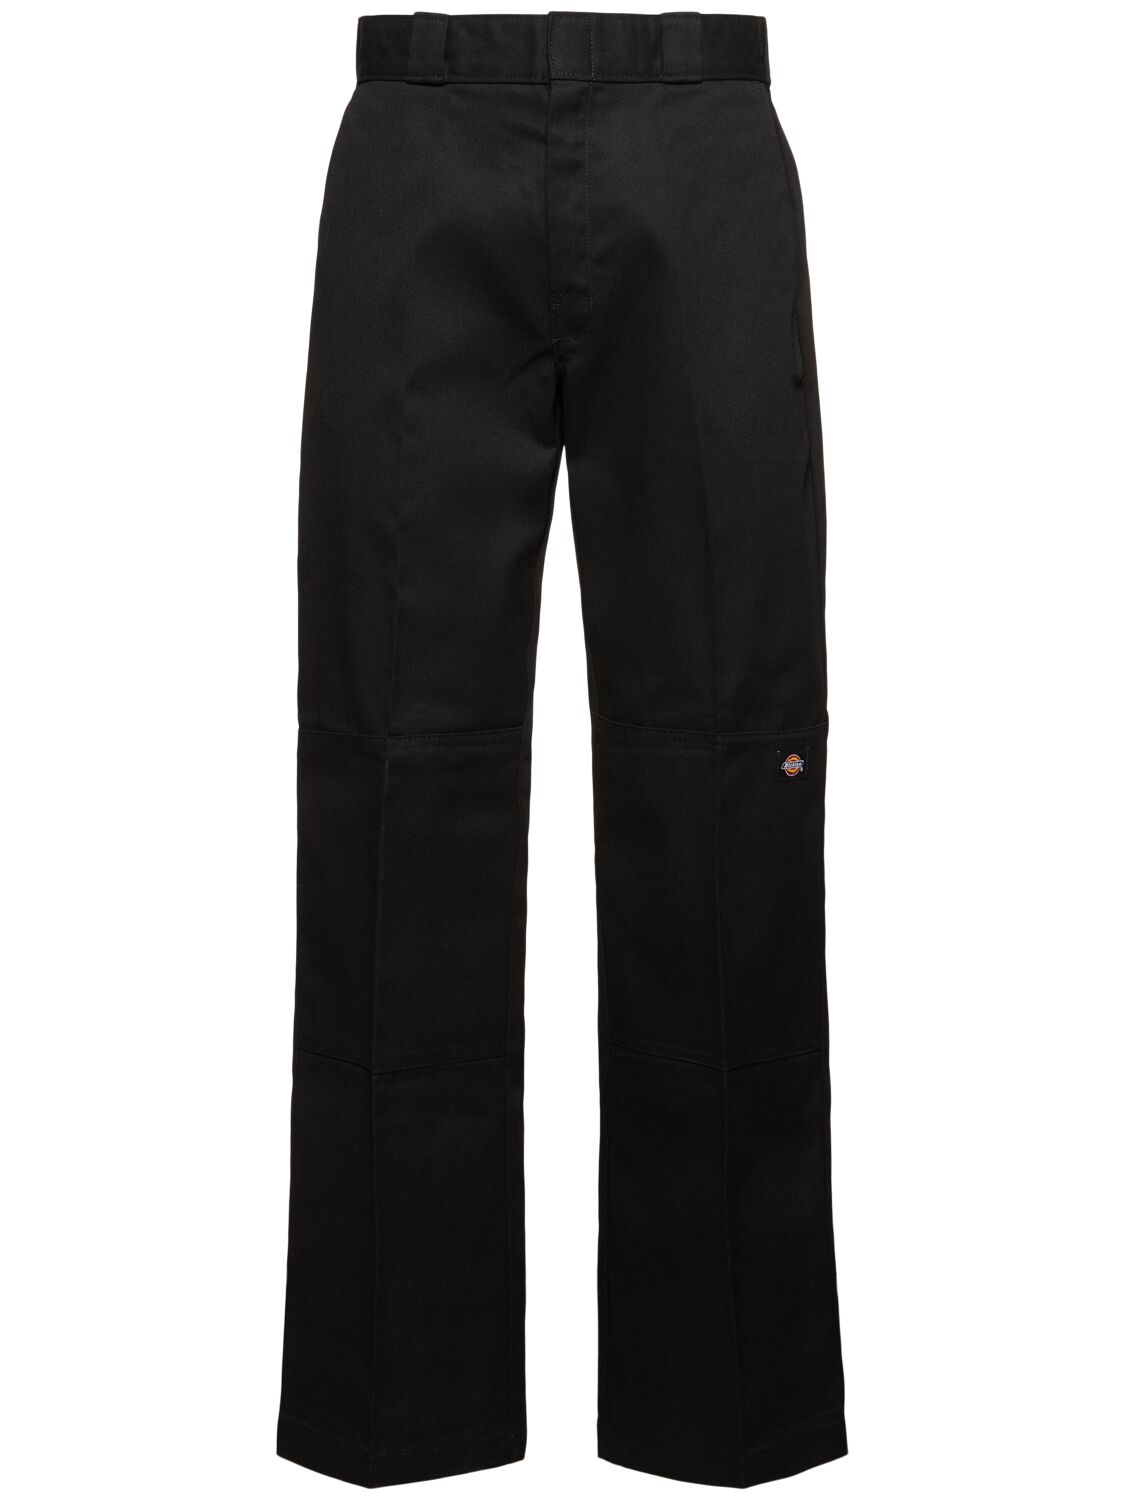 Image of Double-knee Poly & Cotton Work Pants